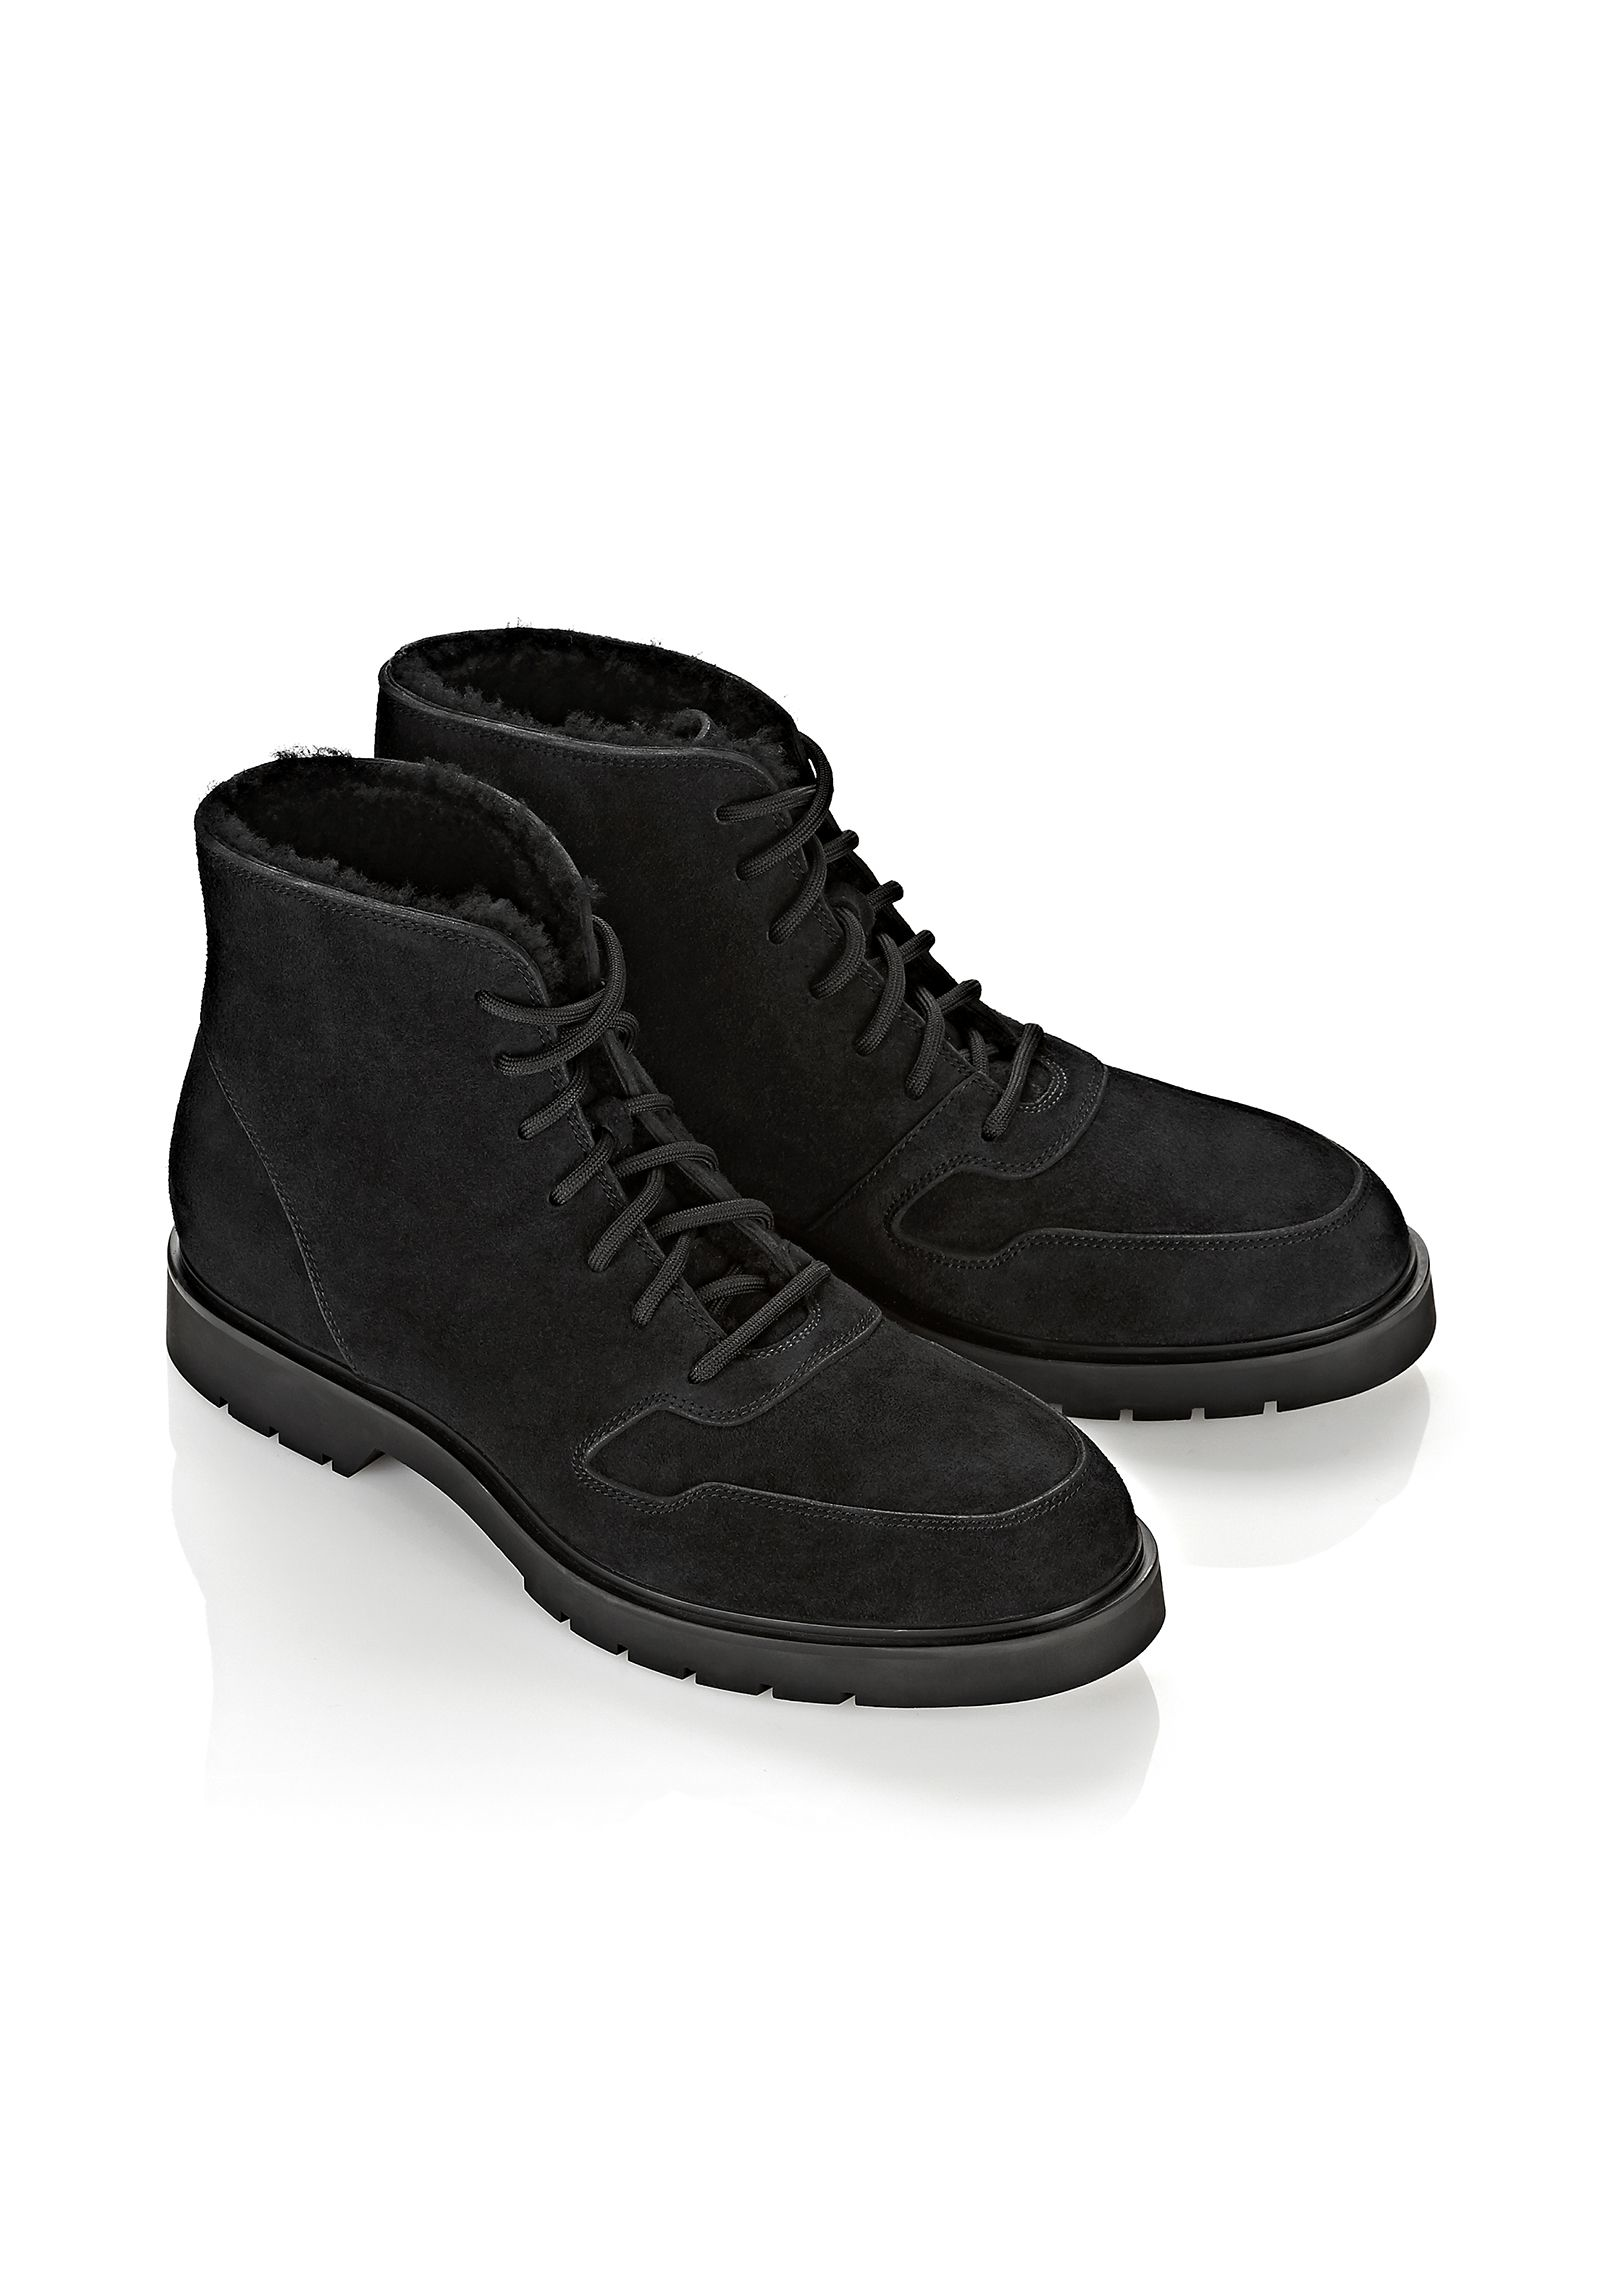 Alexander wang Kaleb Suede Ankle Boots in Black for Men | Lyst